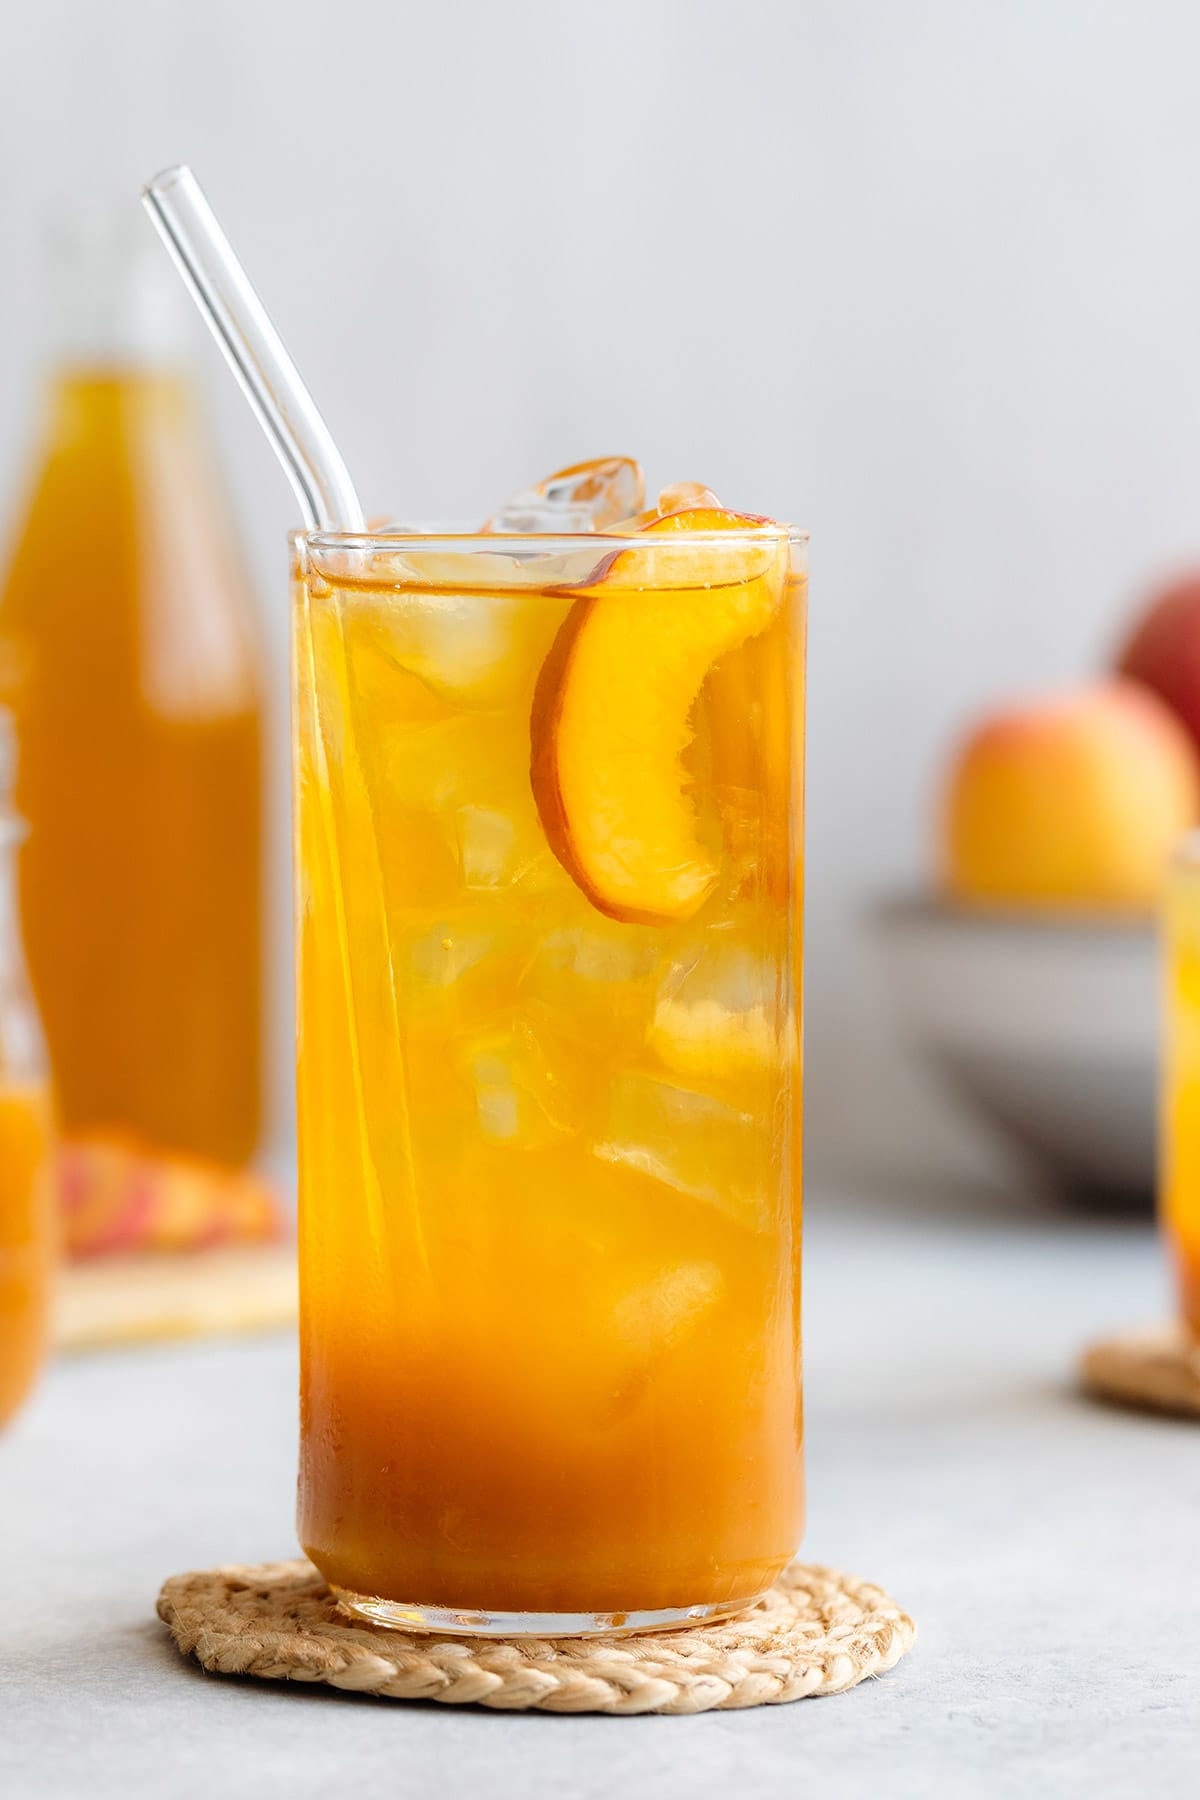 Iced tea in a tall glass with ice and peach slices on a light grey background with more peaches in a bowl in the back.